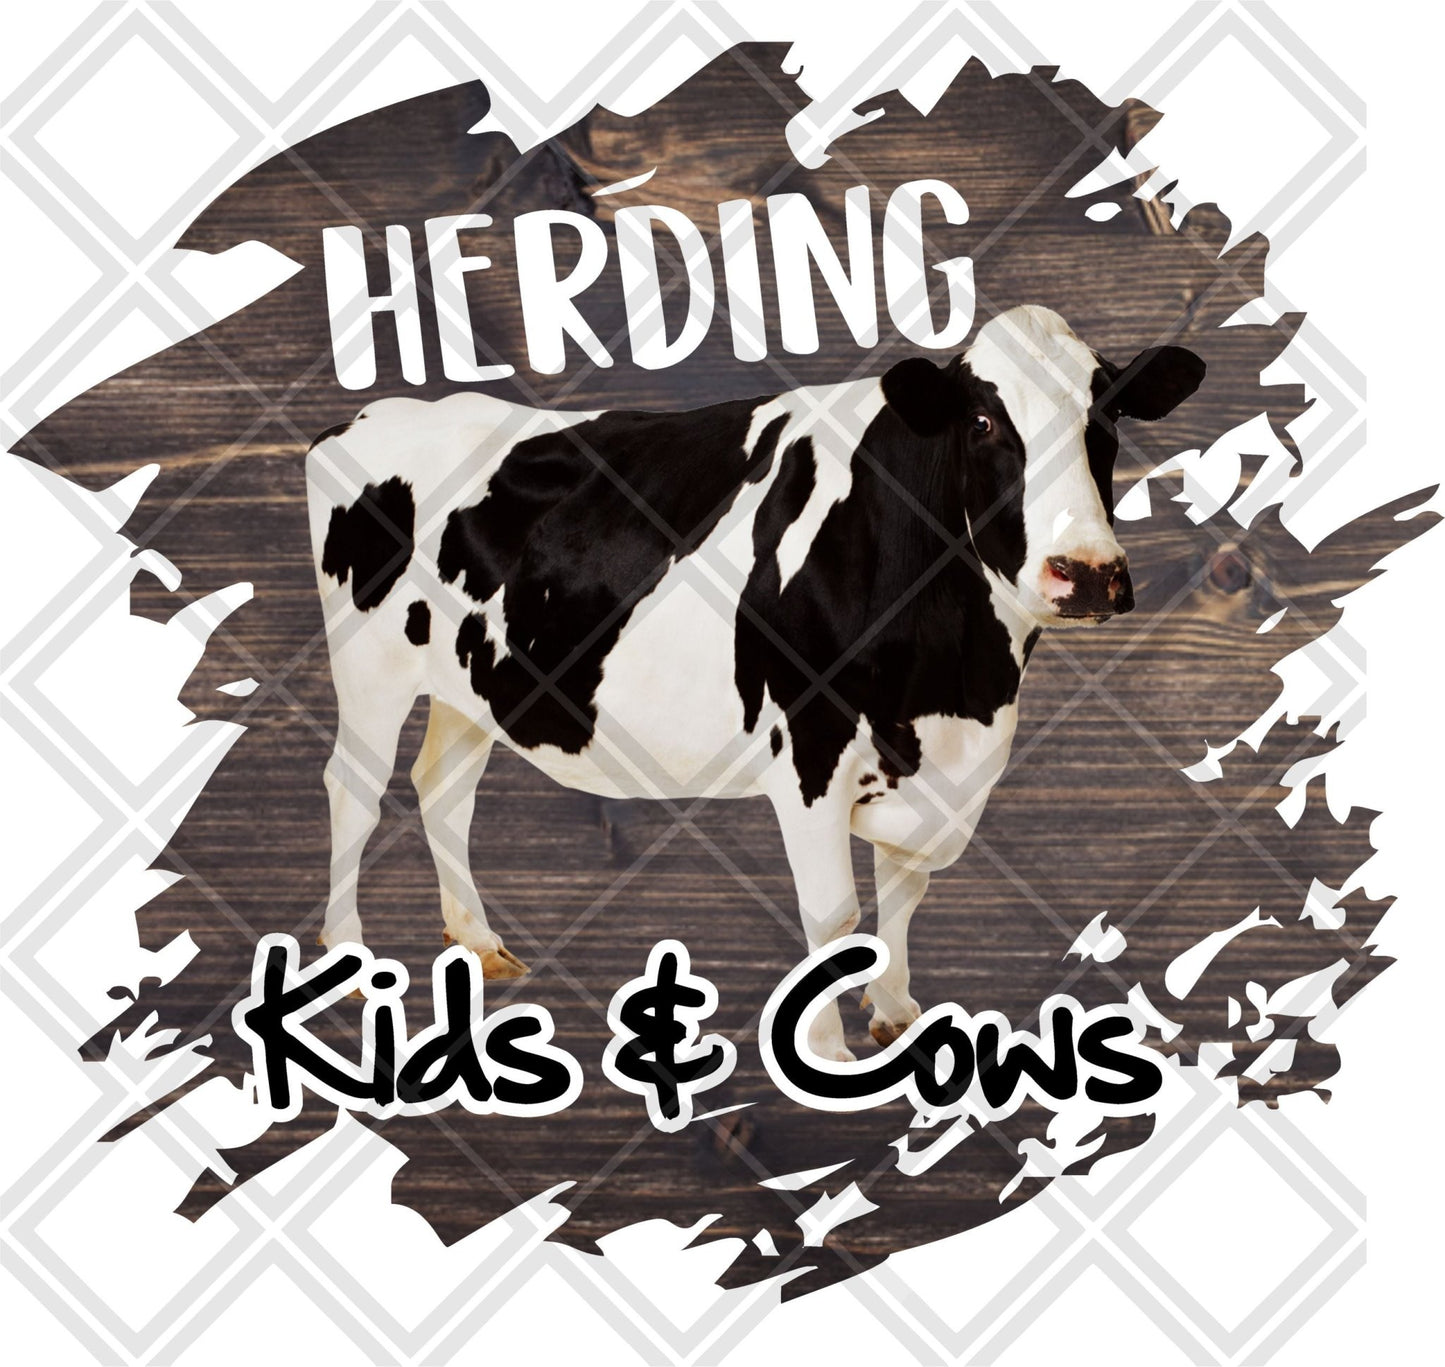 Herding Cows And Kids DTF TRANSFERPRINT TO ORDER - Do it yourself Transfers